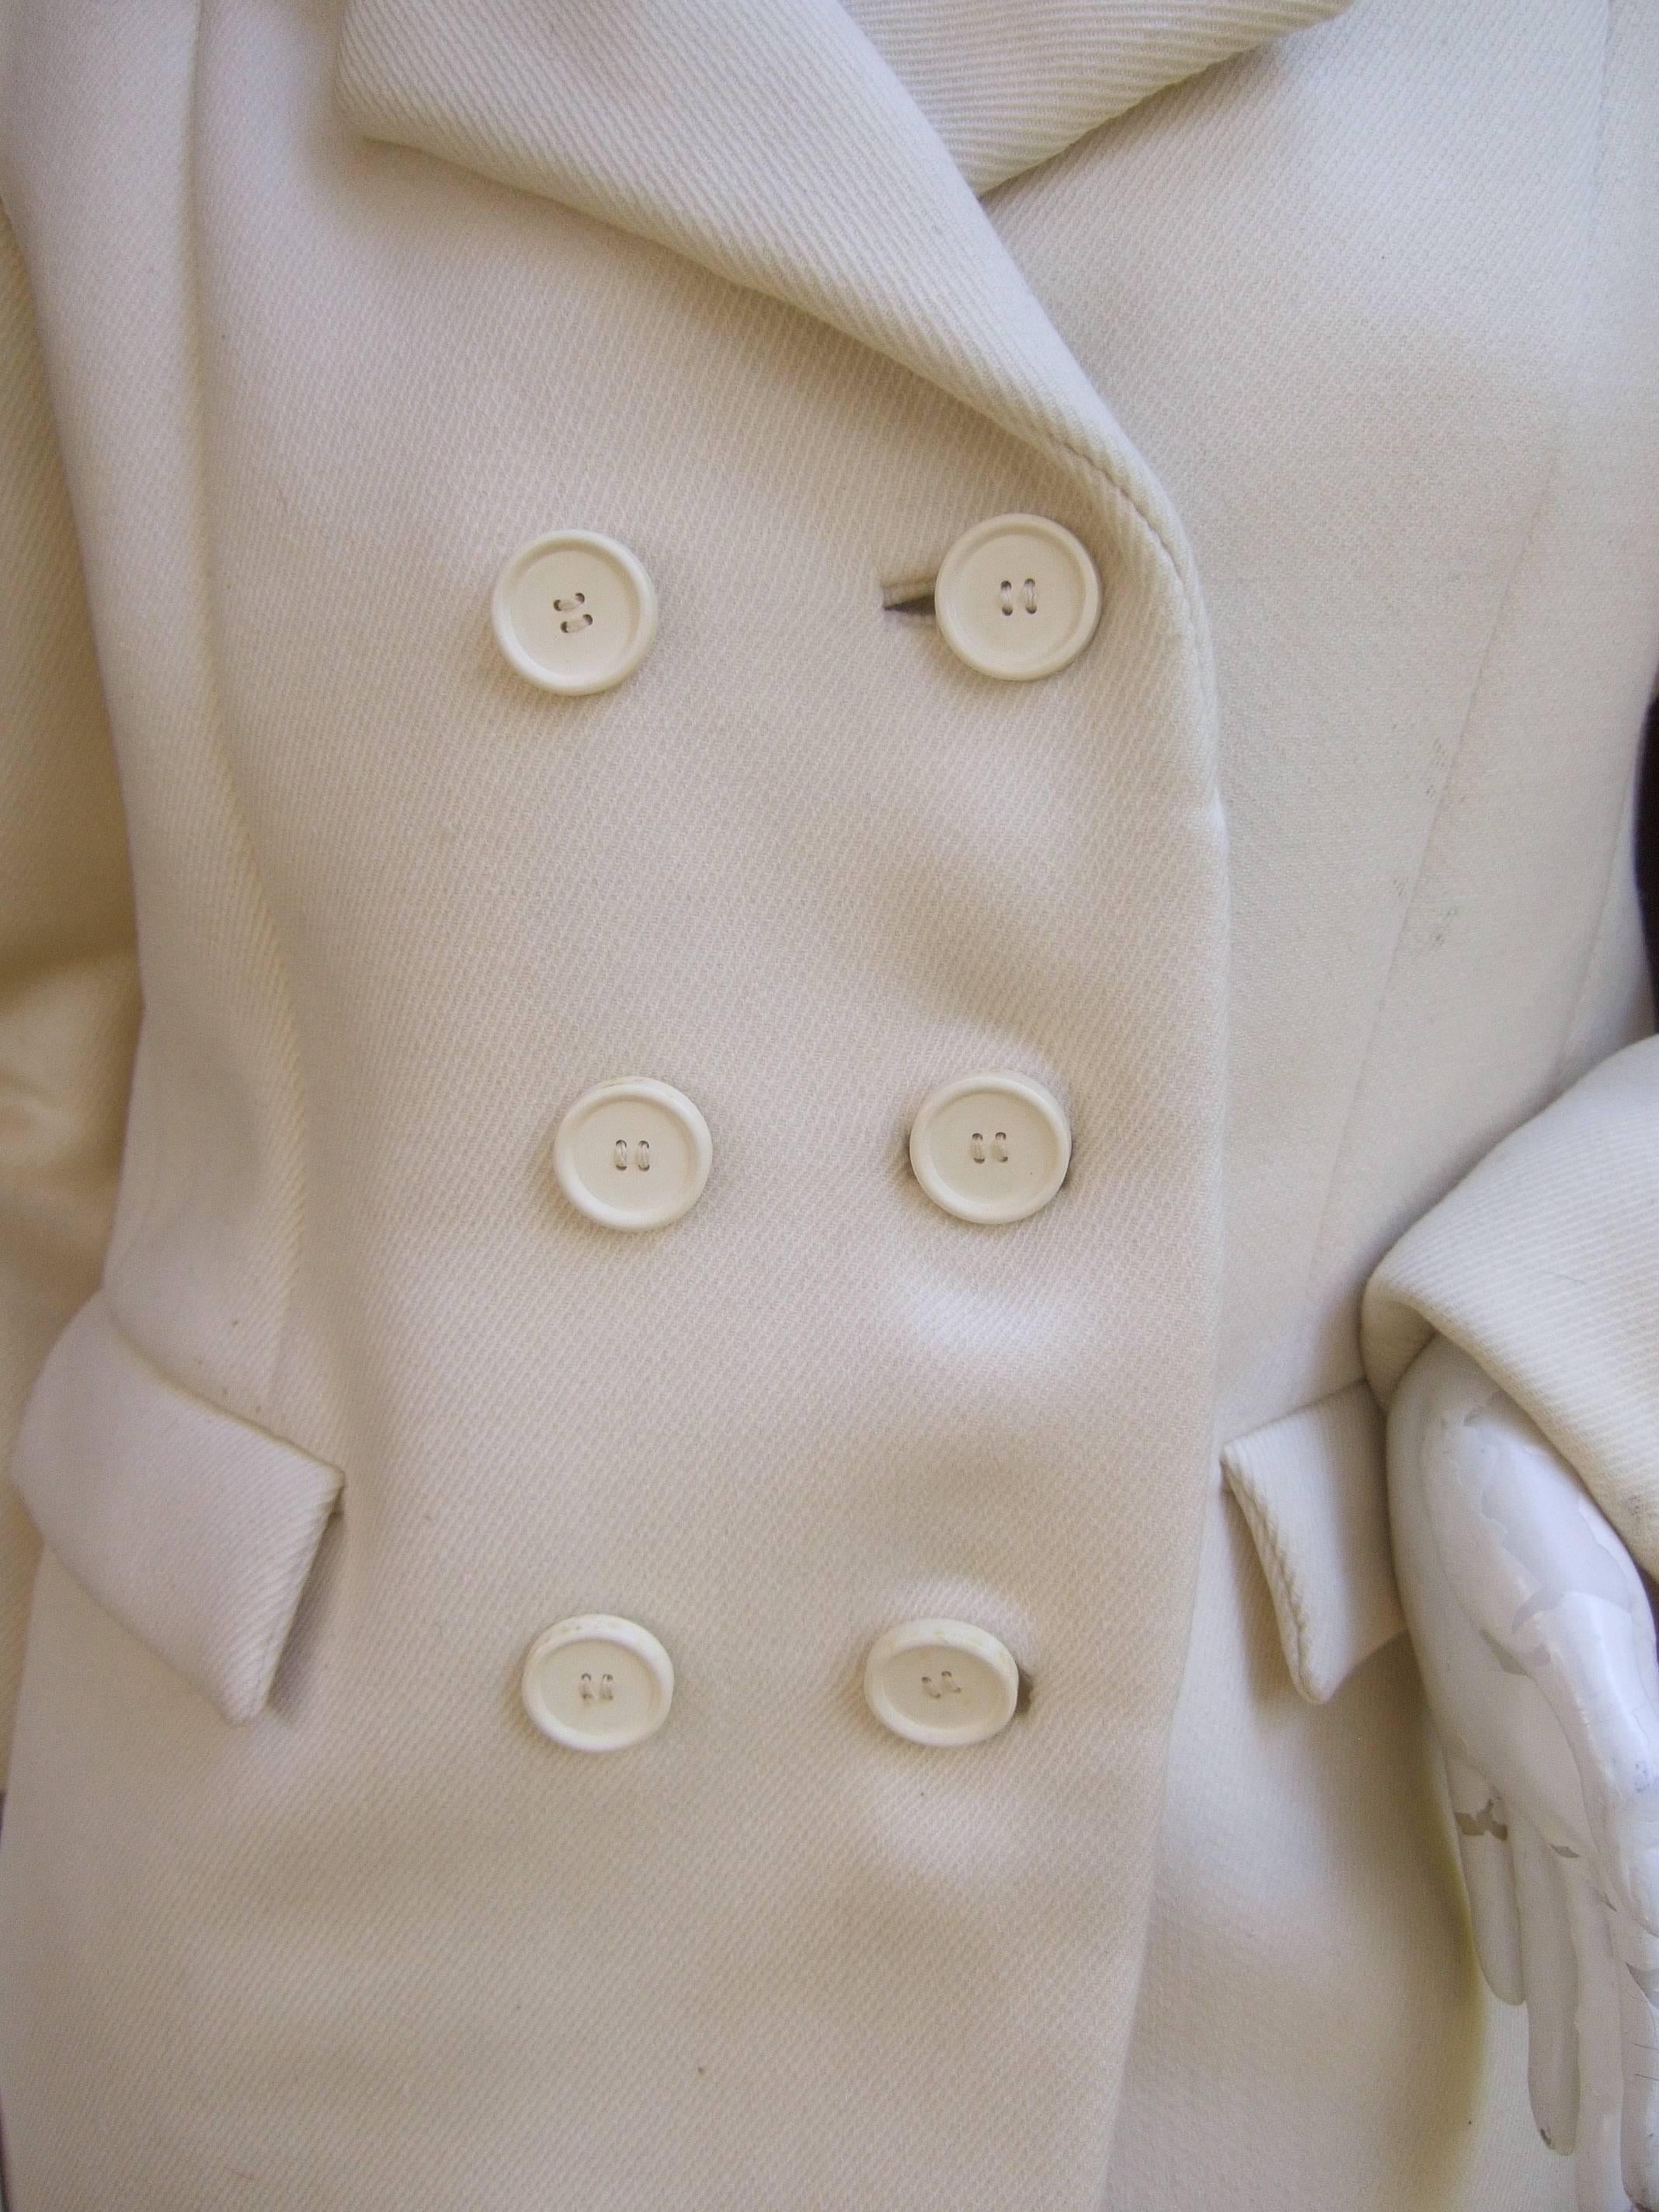 Women's Norman Norell Couture Cream Wool Jacket circa 1970